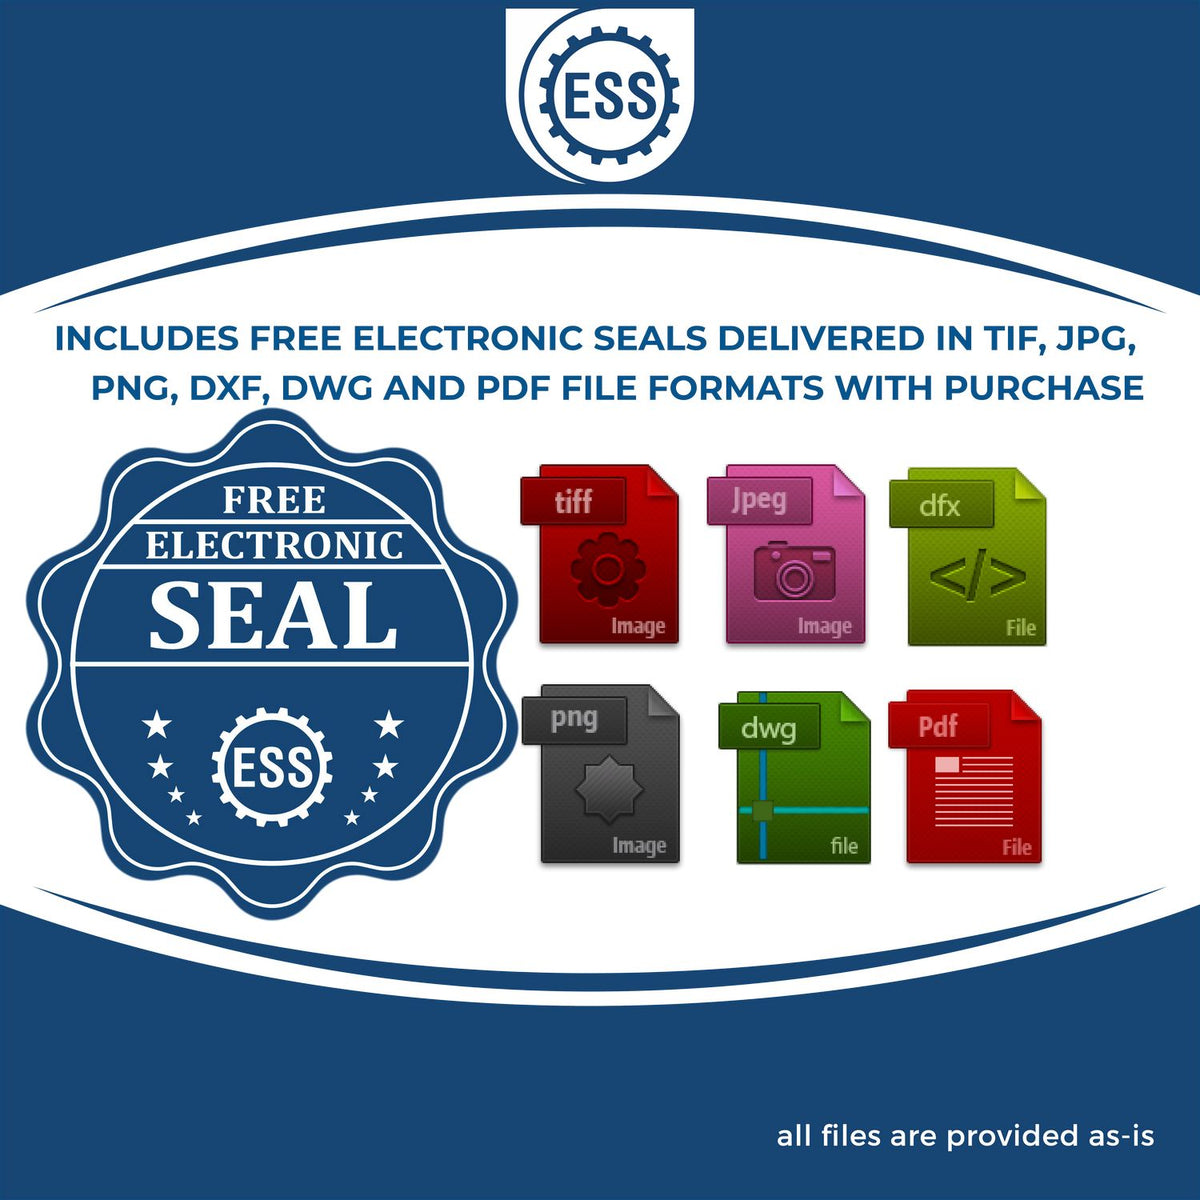 An infographic for the free electronic seal for the MaxLight Premium Pre-Inked Colorado Rectangular Notarial Stamp illustrating the different file type icons such as DXF, DWG, TIF, JPG and PNG.